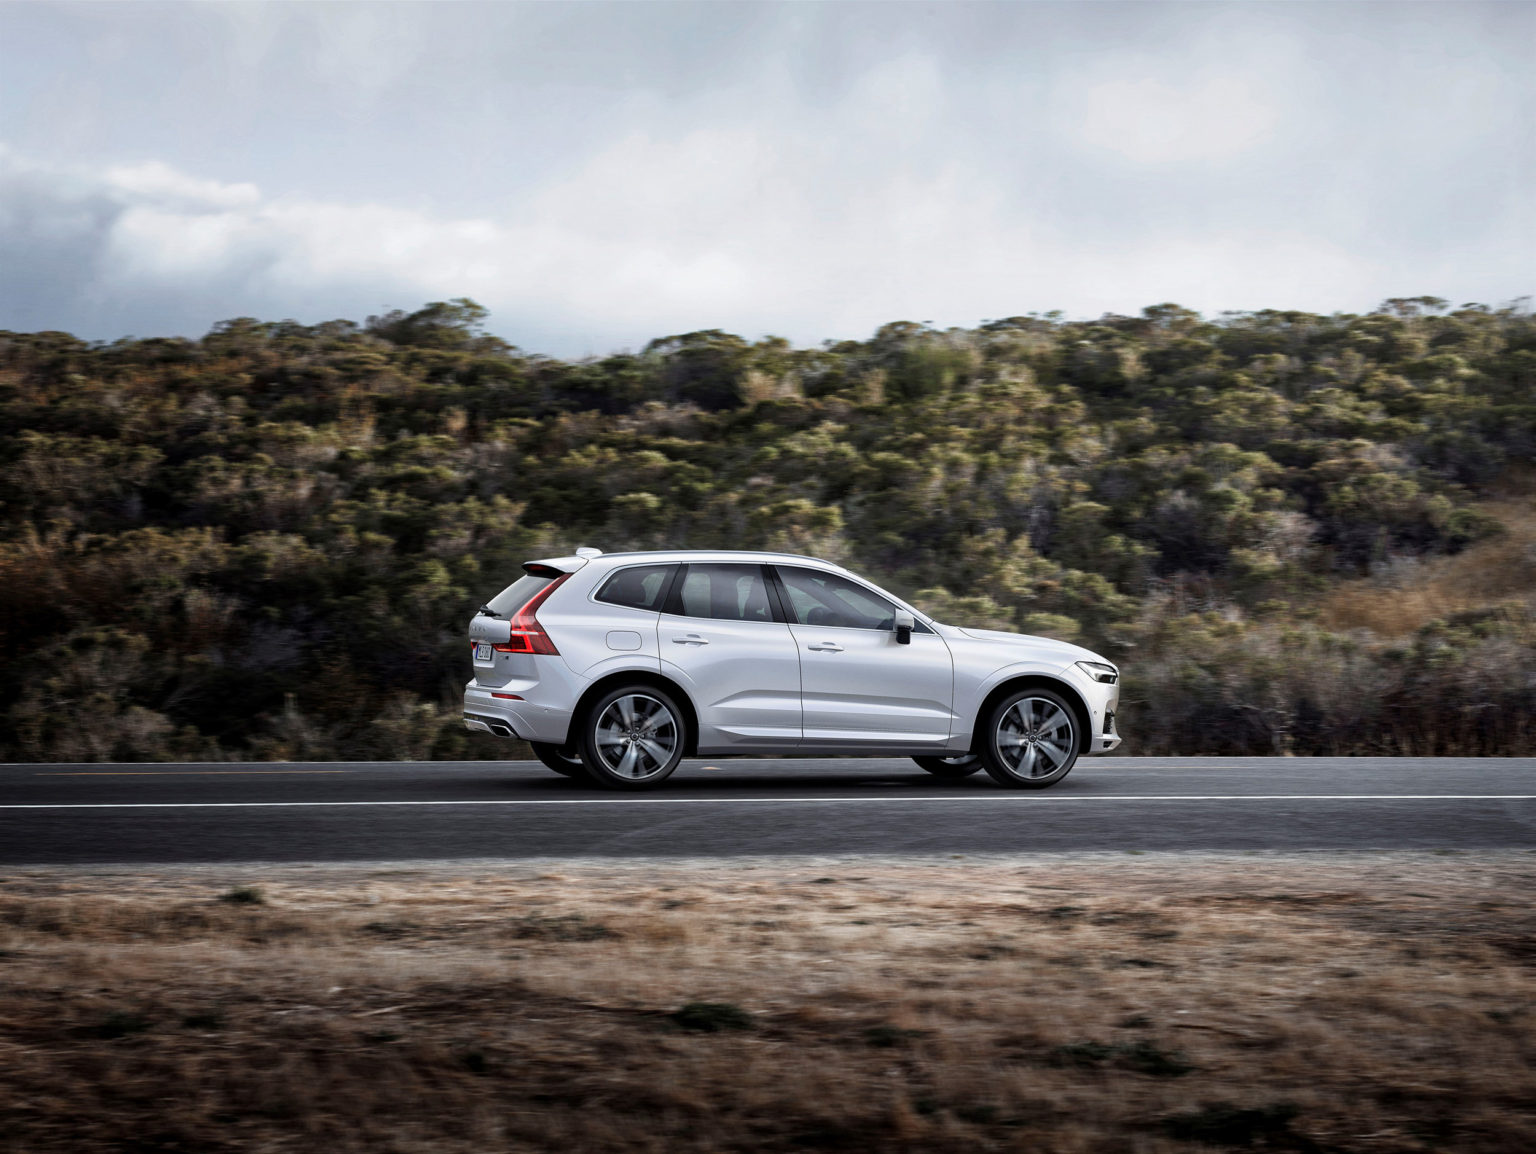 The Volvo XC60 is one of the cars AutomotiveMap's team thinks makes a great two-row SUV for families.